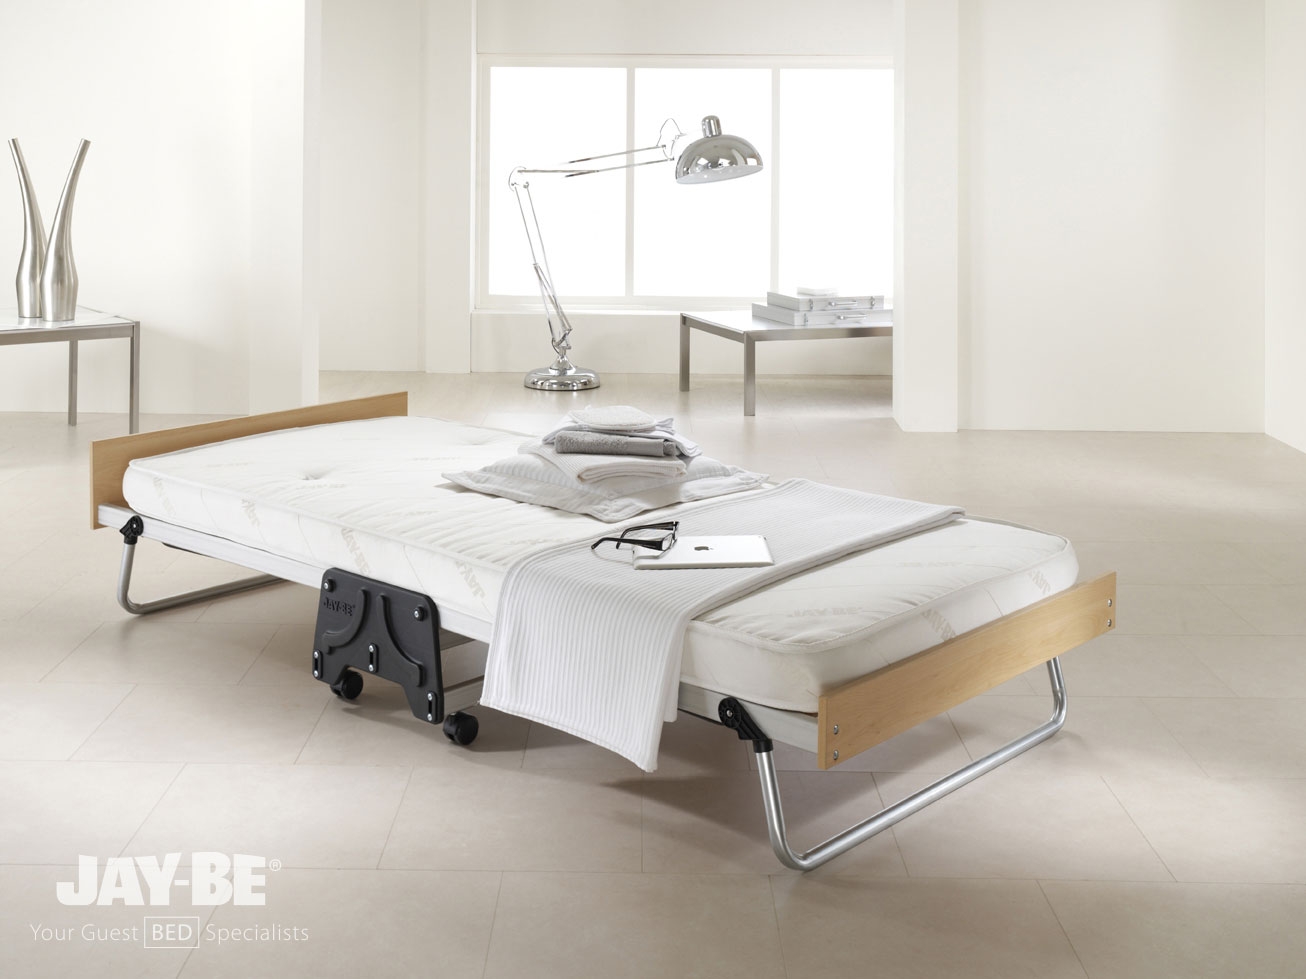 Jay-Be J-Bed Performance Single Folding Bed with